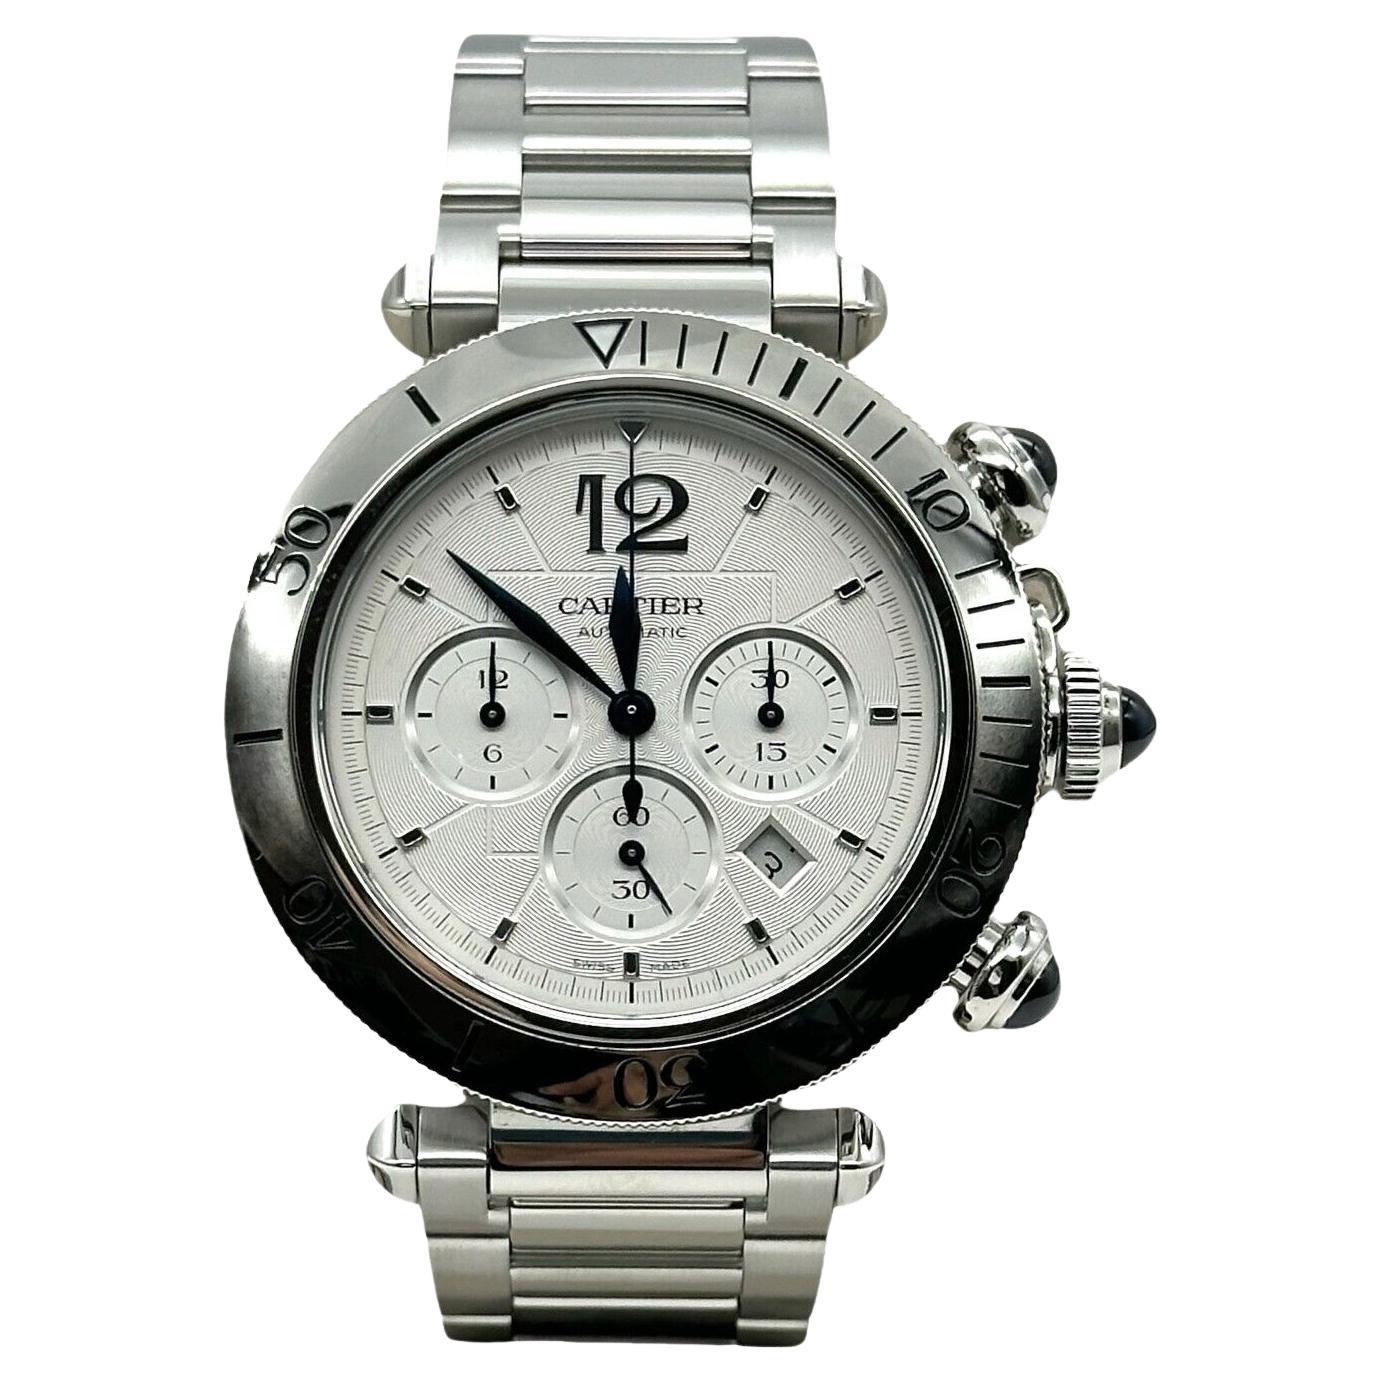 Cartier Pasha WSPA0018 Chronograph Ref 4363 Chronograph Stainless Box Paper For Sale